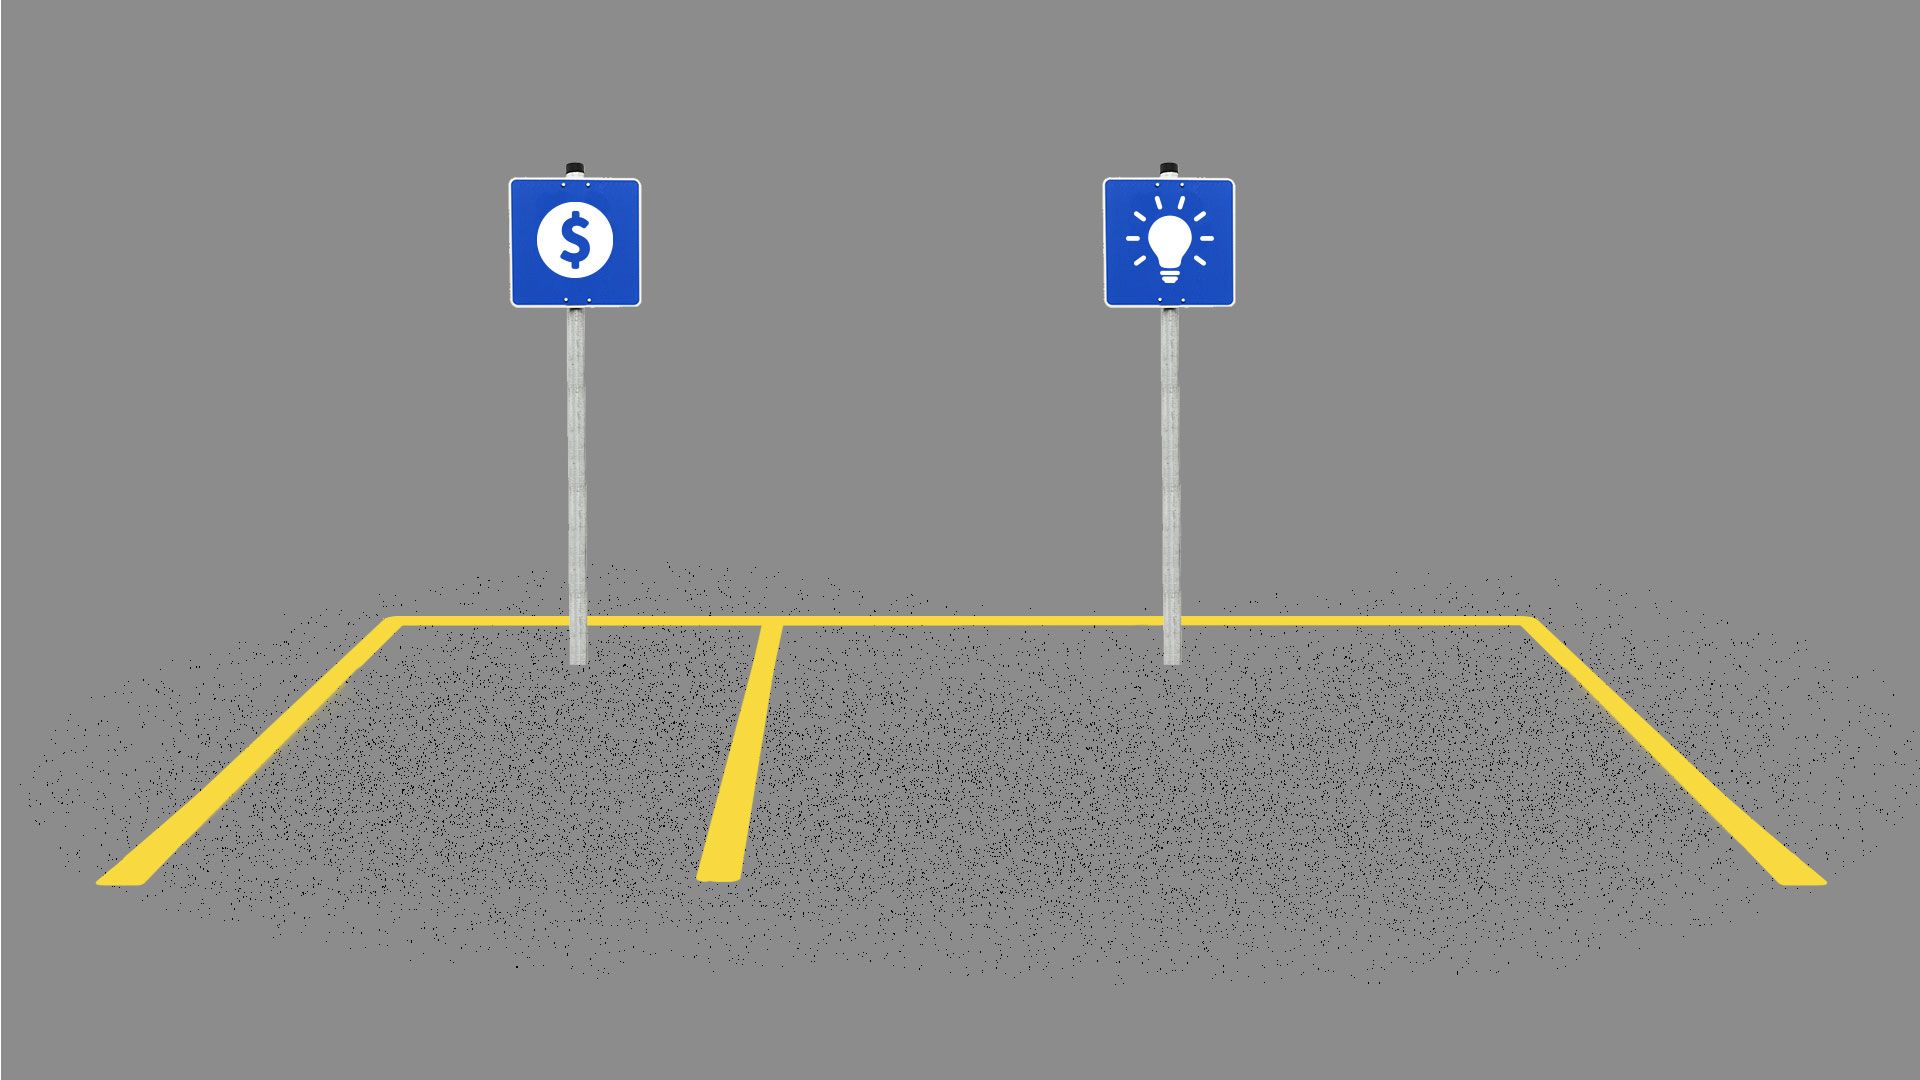 Illustration of two parking spaces, one marked for founders the other for investors. The founders spot is twice as large.